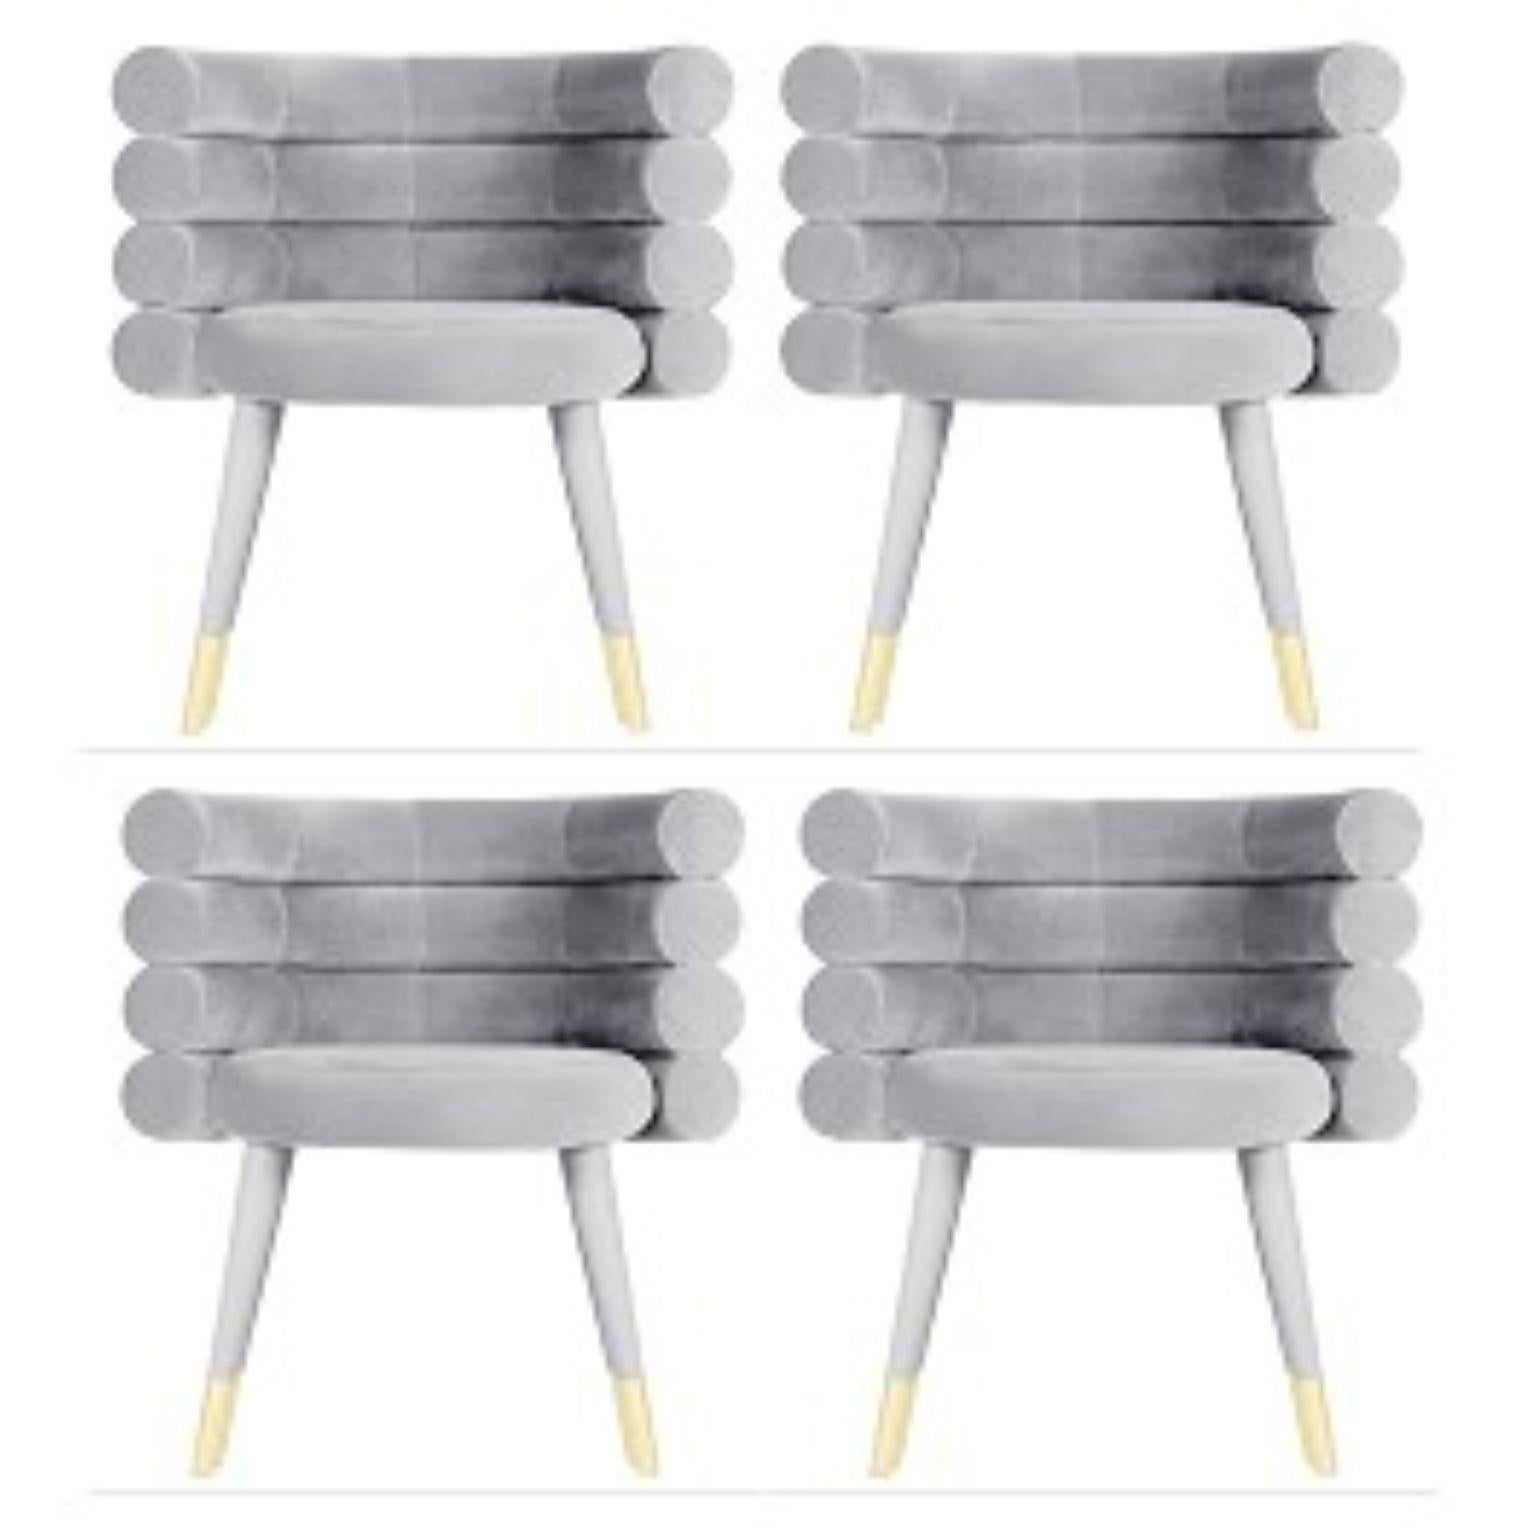 Set of 4 grey marshmallow dining chairs, Royal Stranger
Dimensions: 78 x 70 x 60 cm
Materials: Velvet upholstery and brass
Available in: Mint green, light pink, royal green and royal red

Royal Stranger is an exclusive furniture brand